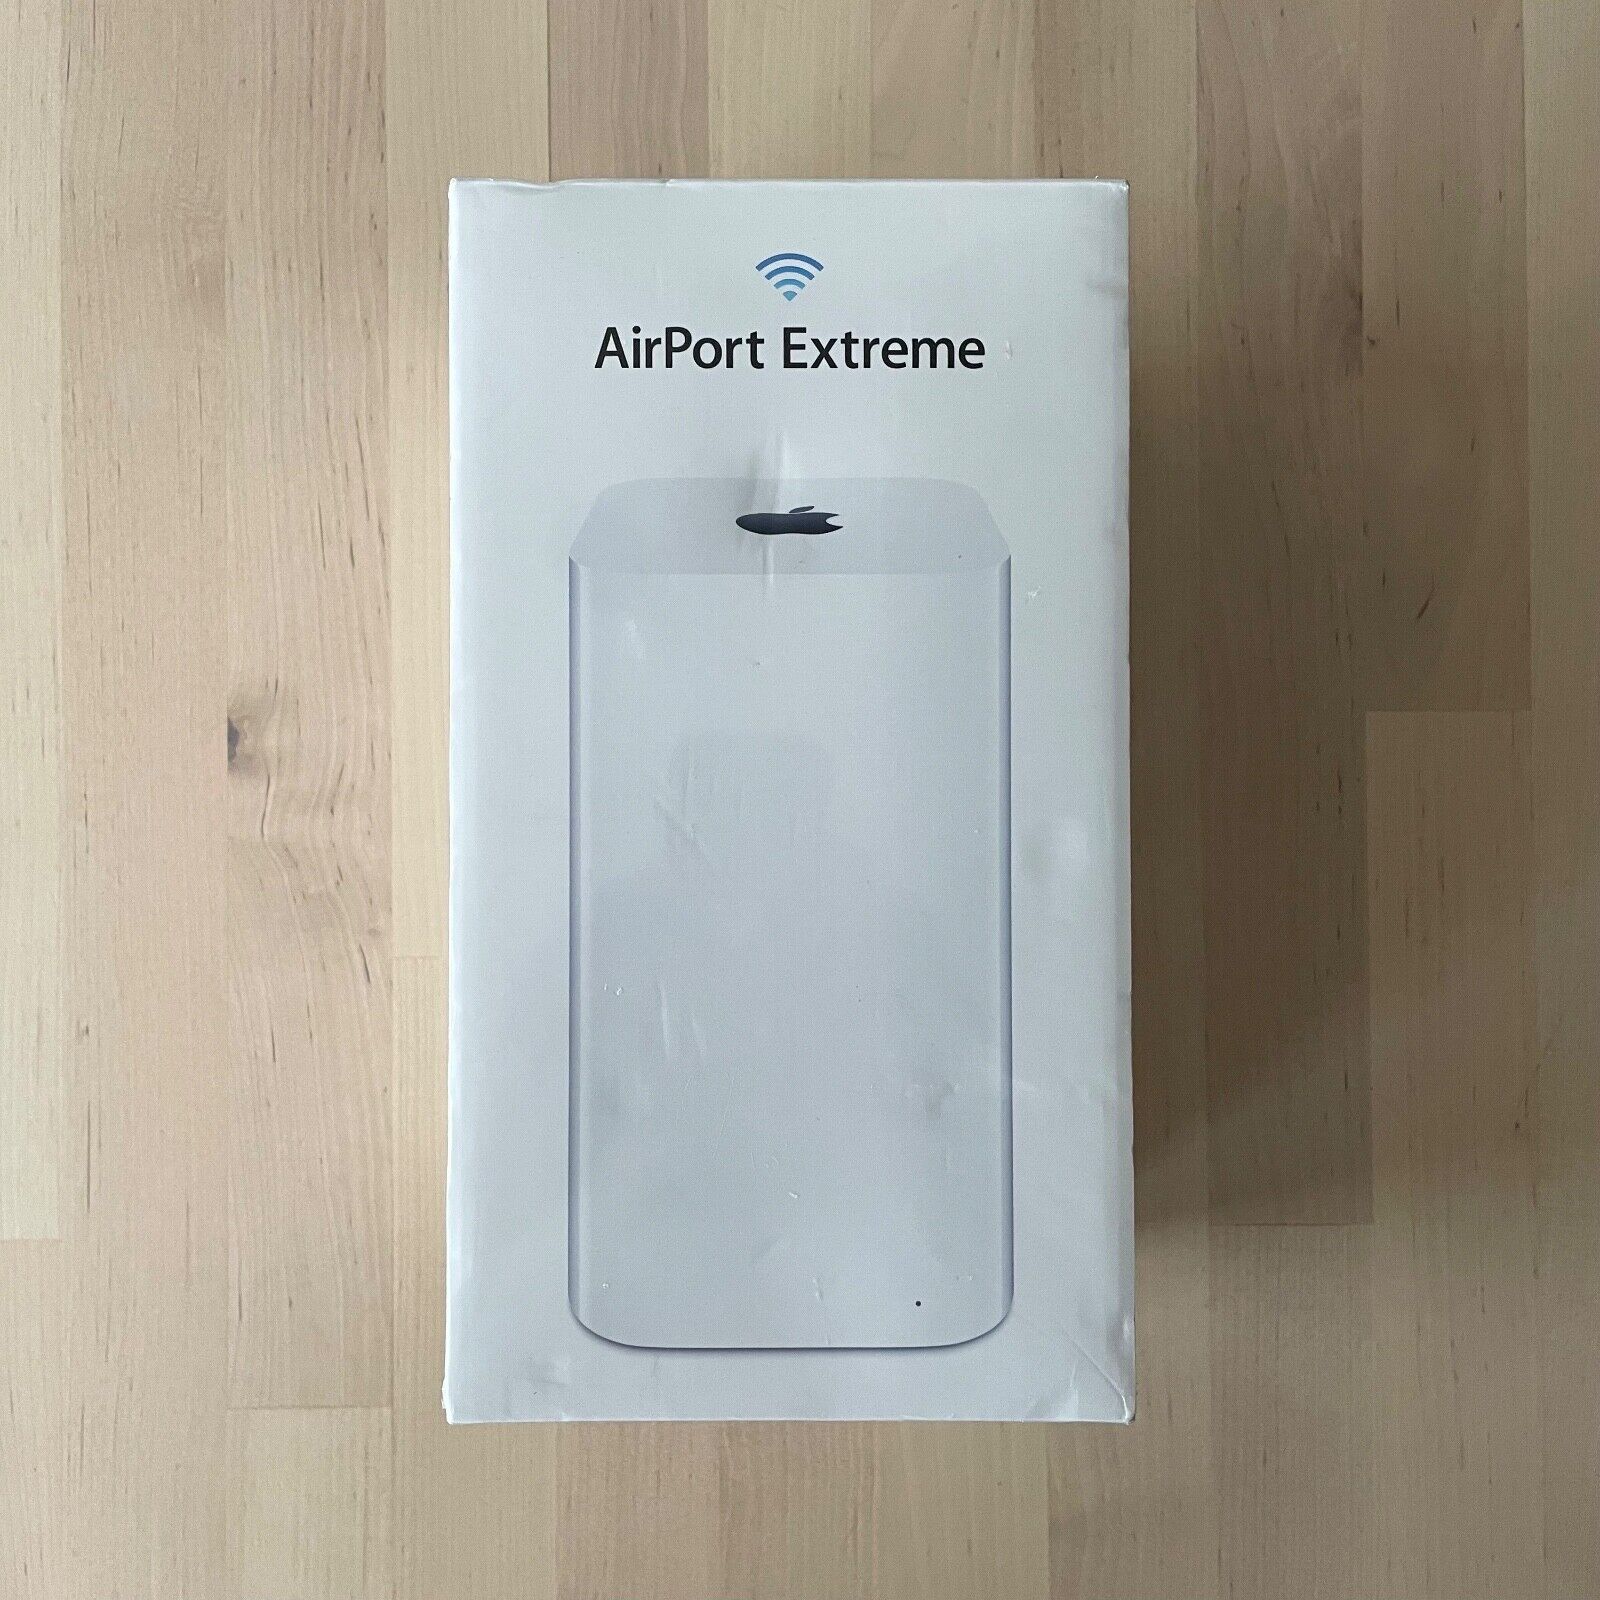 Apple AirPort Extreme 802.11ac WiFi Router A1521 ME918LL/A - Brand New Sealed